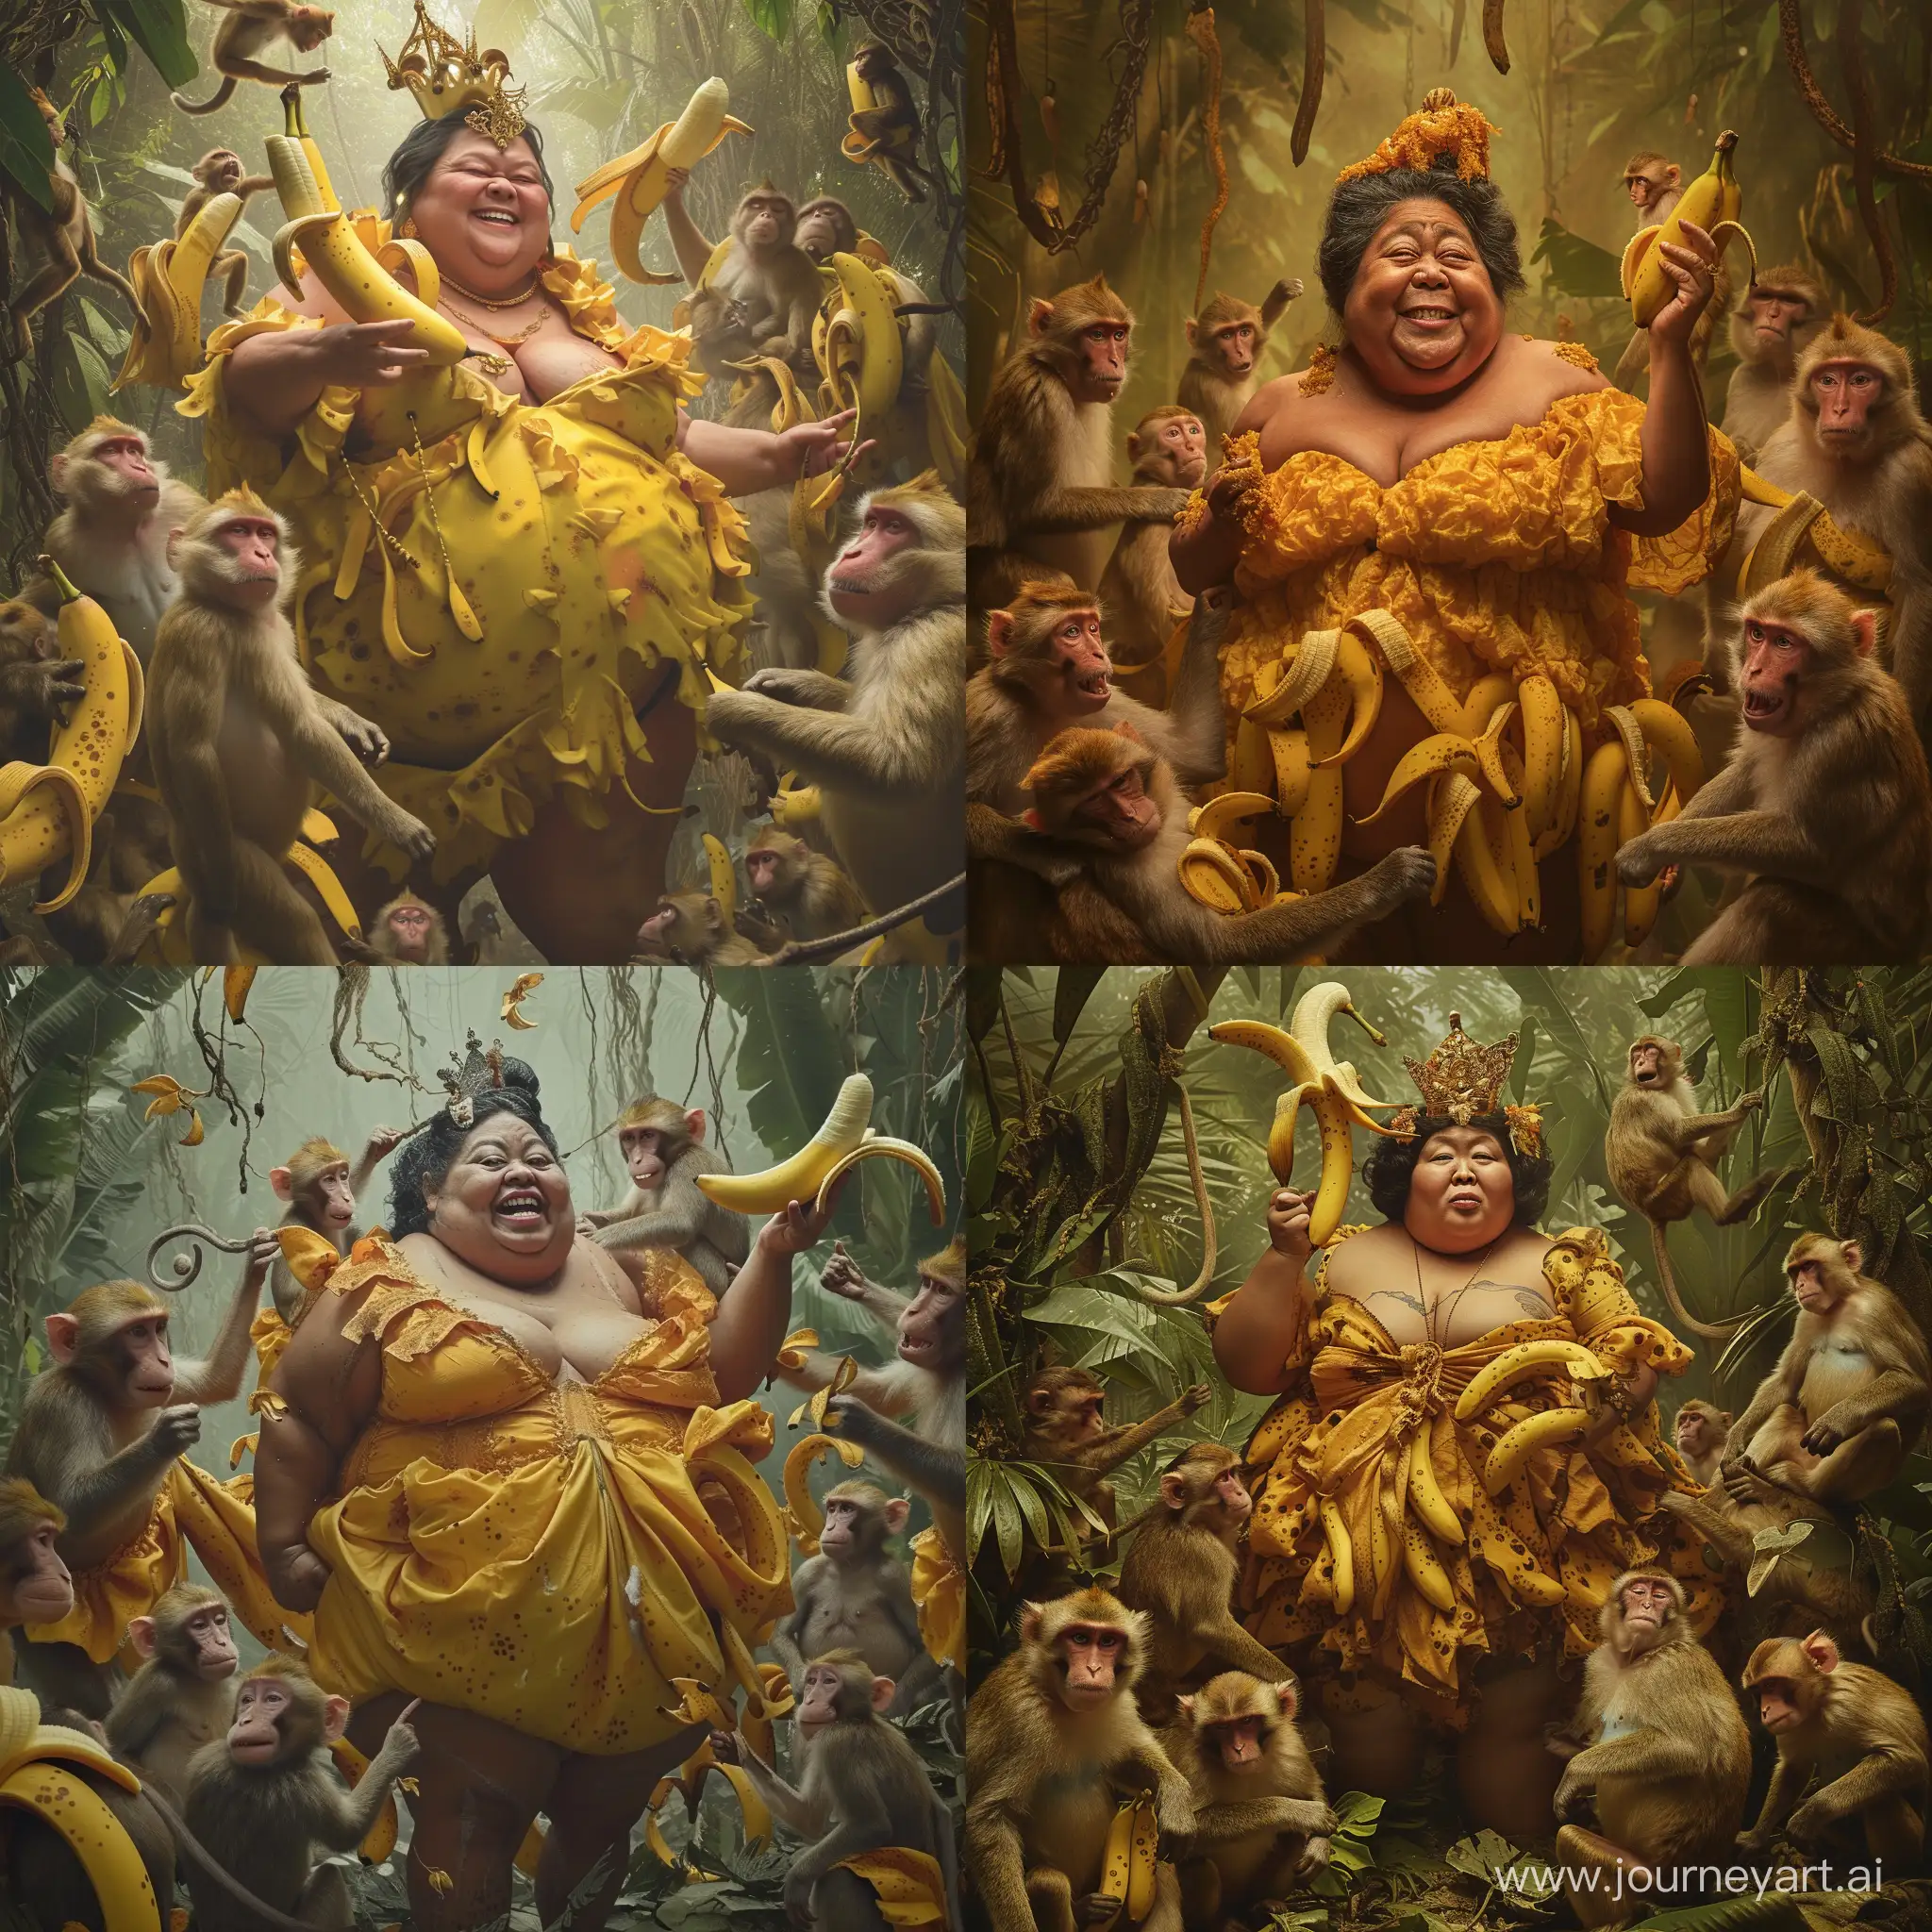 Banana-Empress-Surrounded-by-Playful-Monkeys-in-Vibrant-Attire